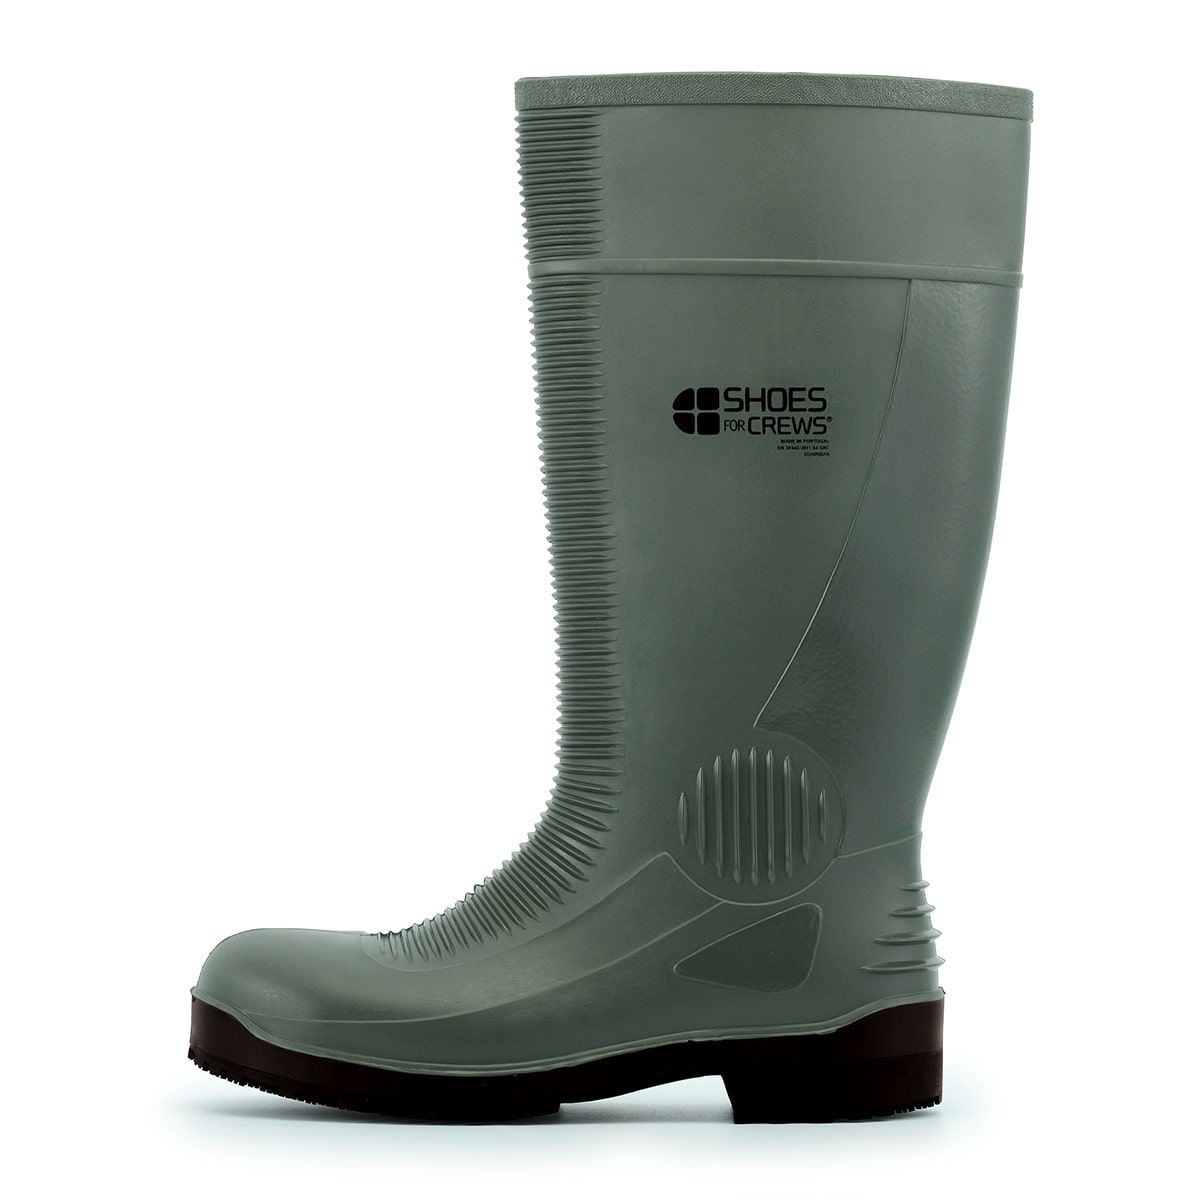 The Guardian Green from Shoes For Crews waterproof wellington boots offers superior slip resistance on a variety of flooring surfaces, seen from the left.